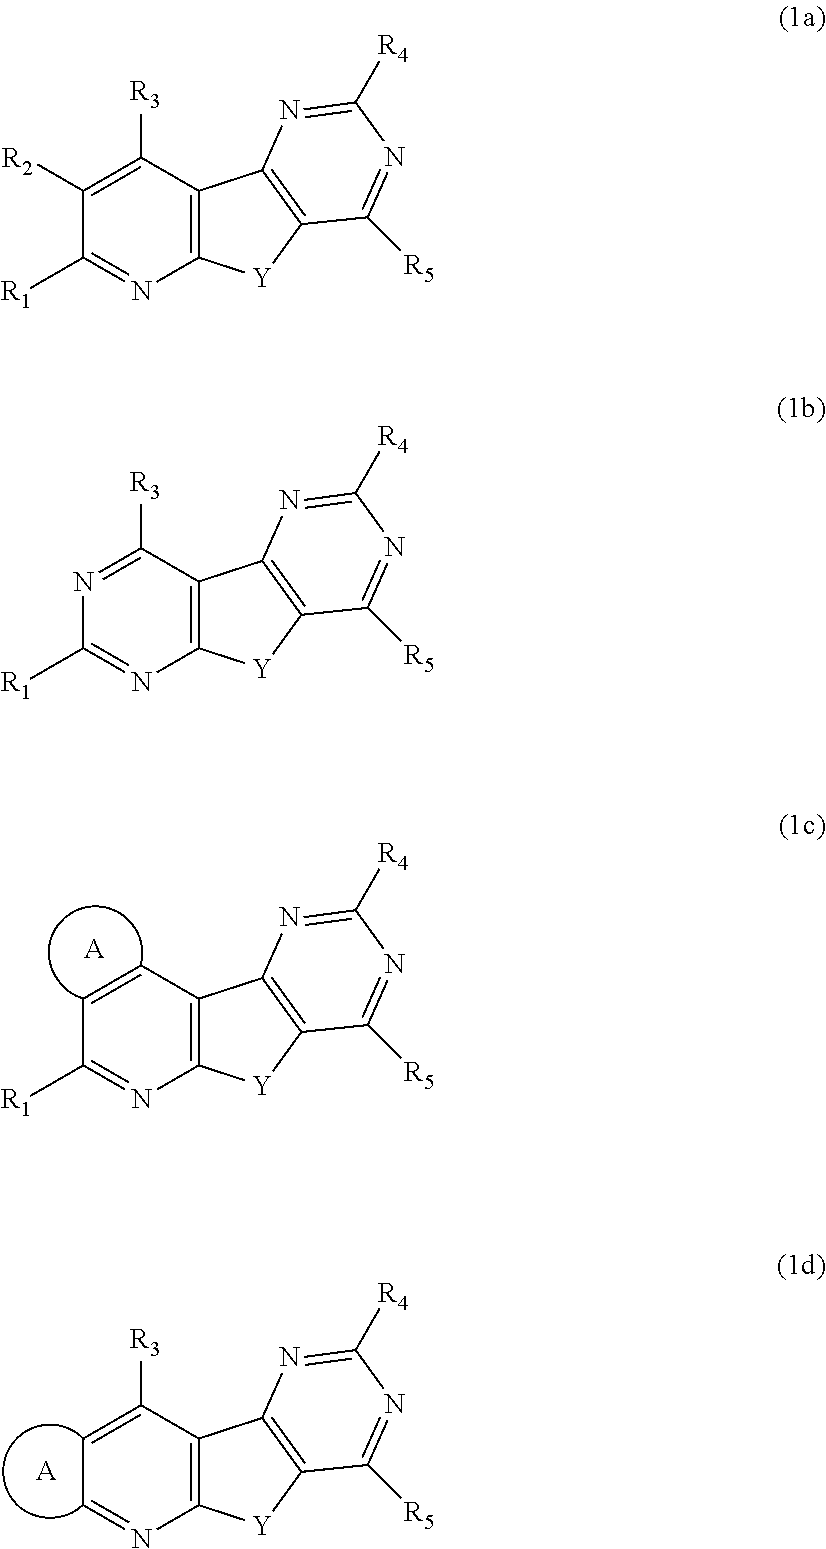 SUBSTITUTED PYRIDO [3', 2': 4, 5] THIENO [3, 2-D] PYRIMIDINES AND PYRIDO [3', 2': 4, 5] FURO [3, 2-D] PYRIMIDINES USED AS INHIBITORS OF THE PDE-4 AND/OR THE RELEASE OF TNF-alpha